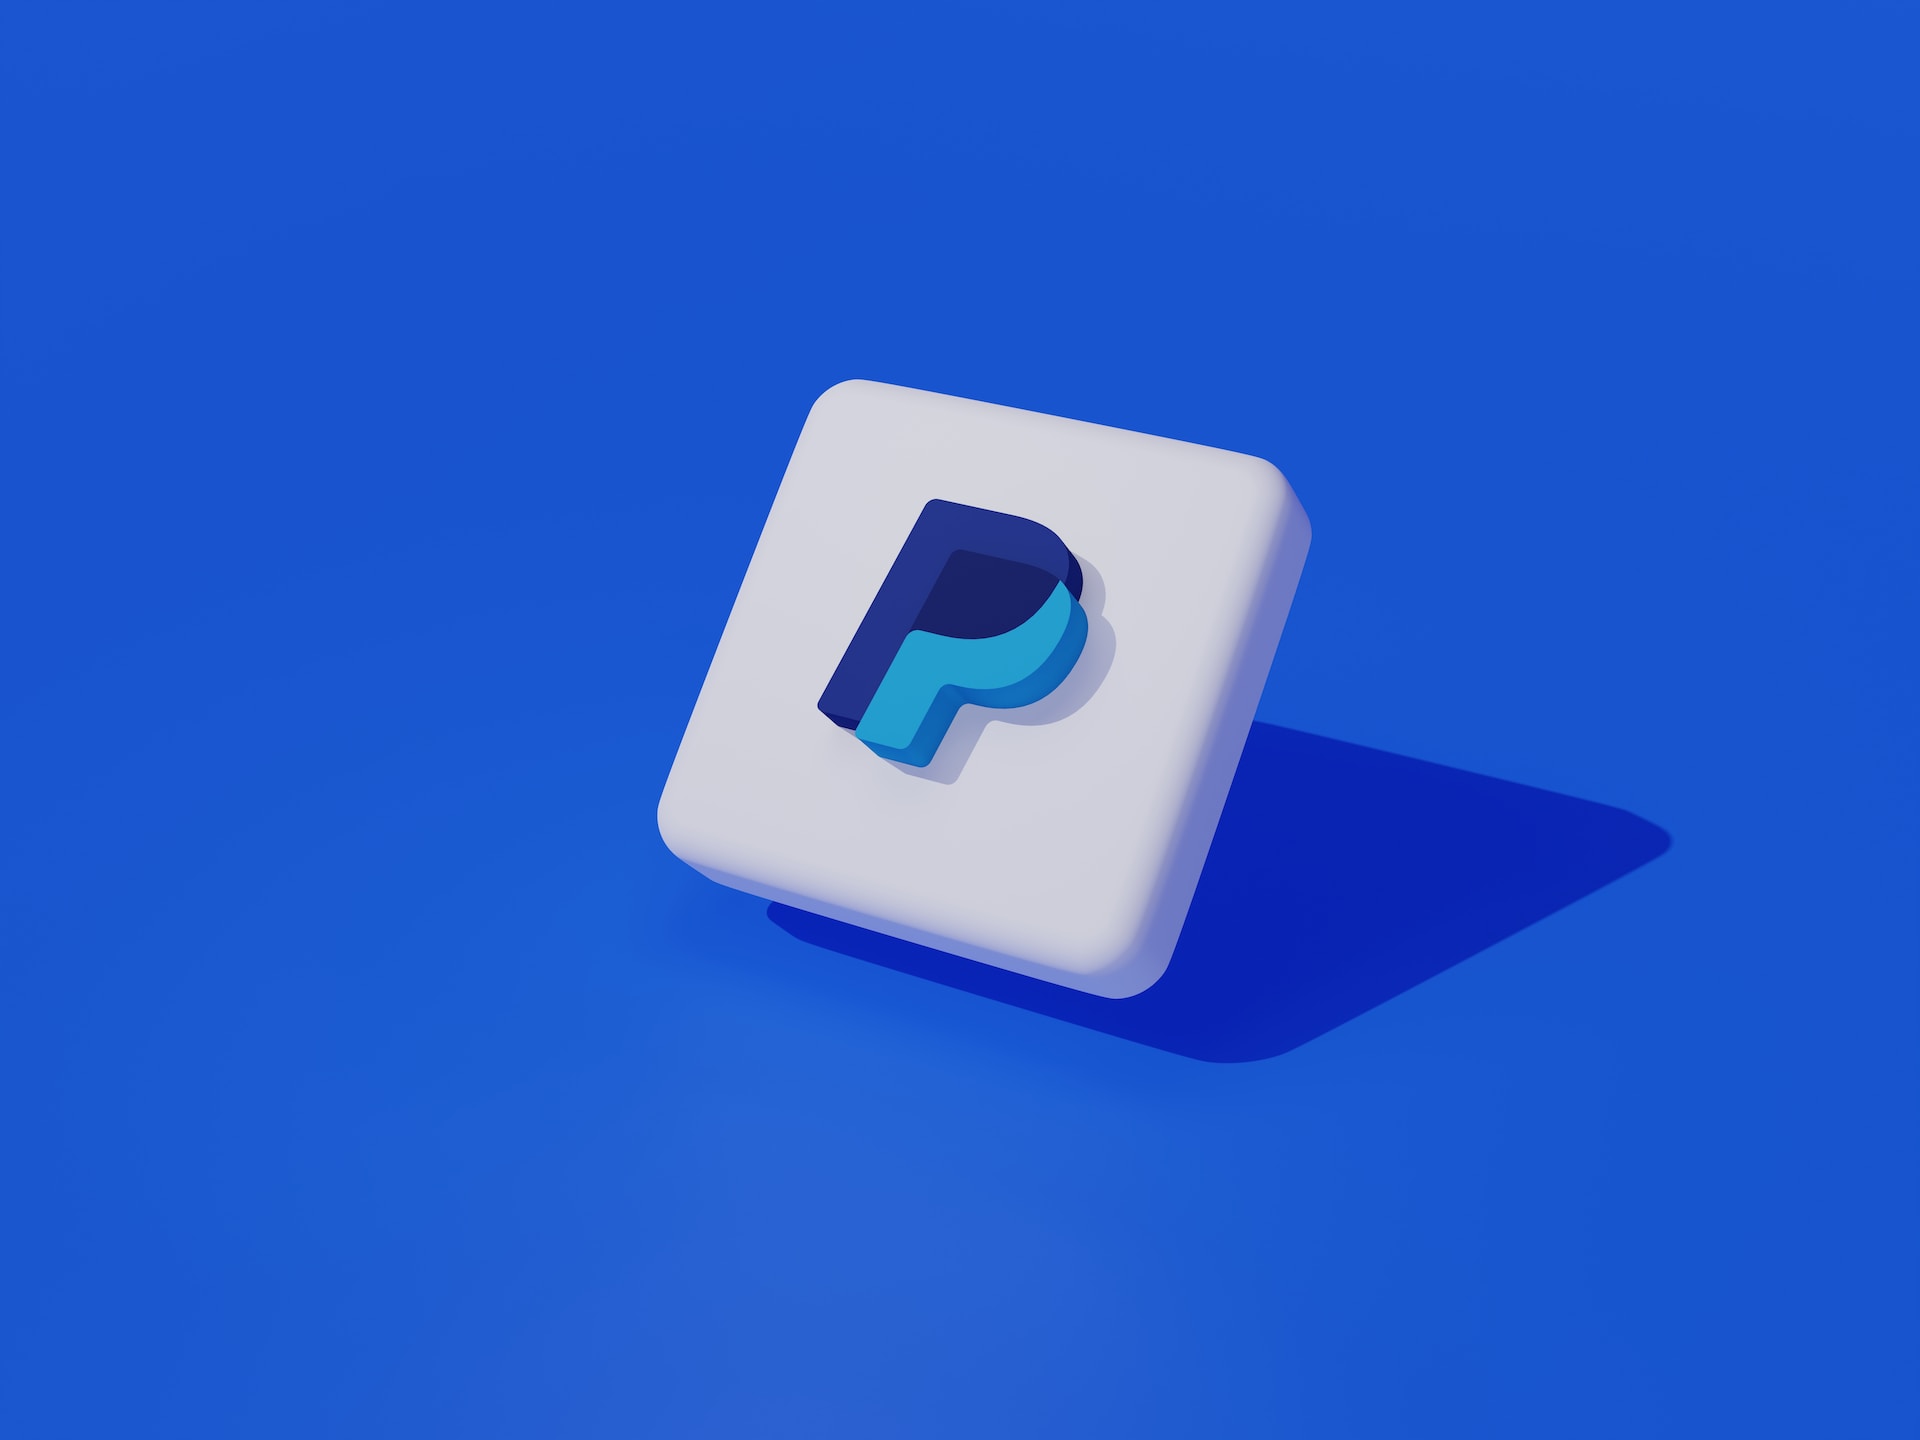 The official PayPal logo in a white square